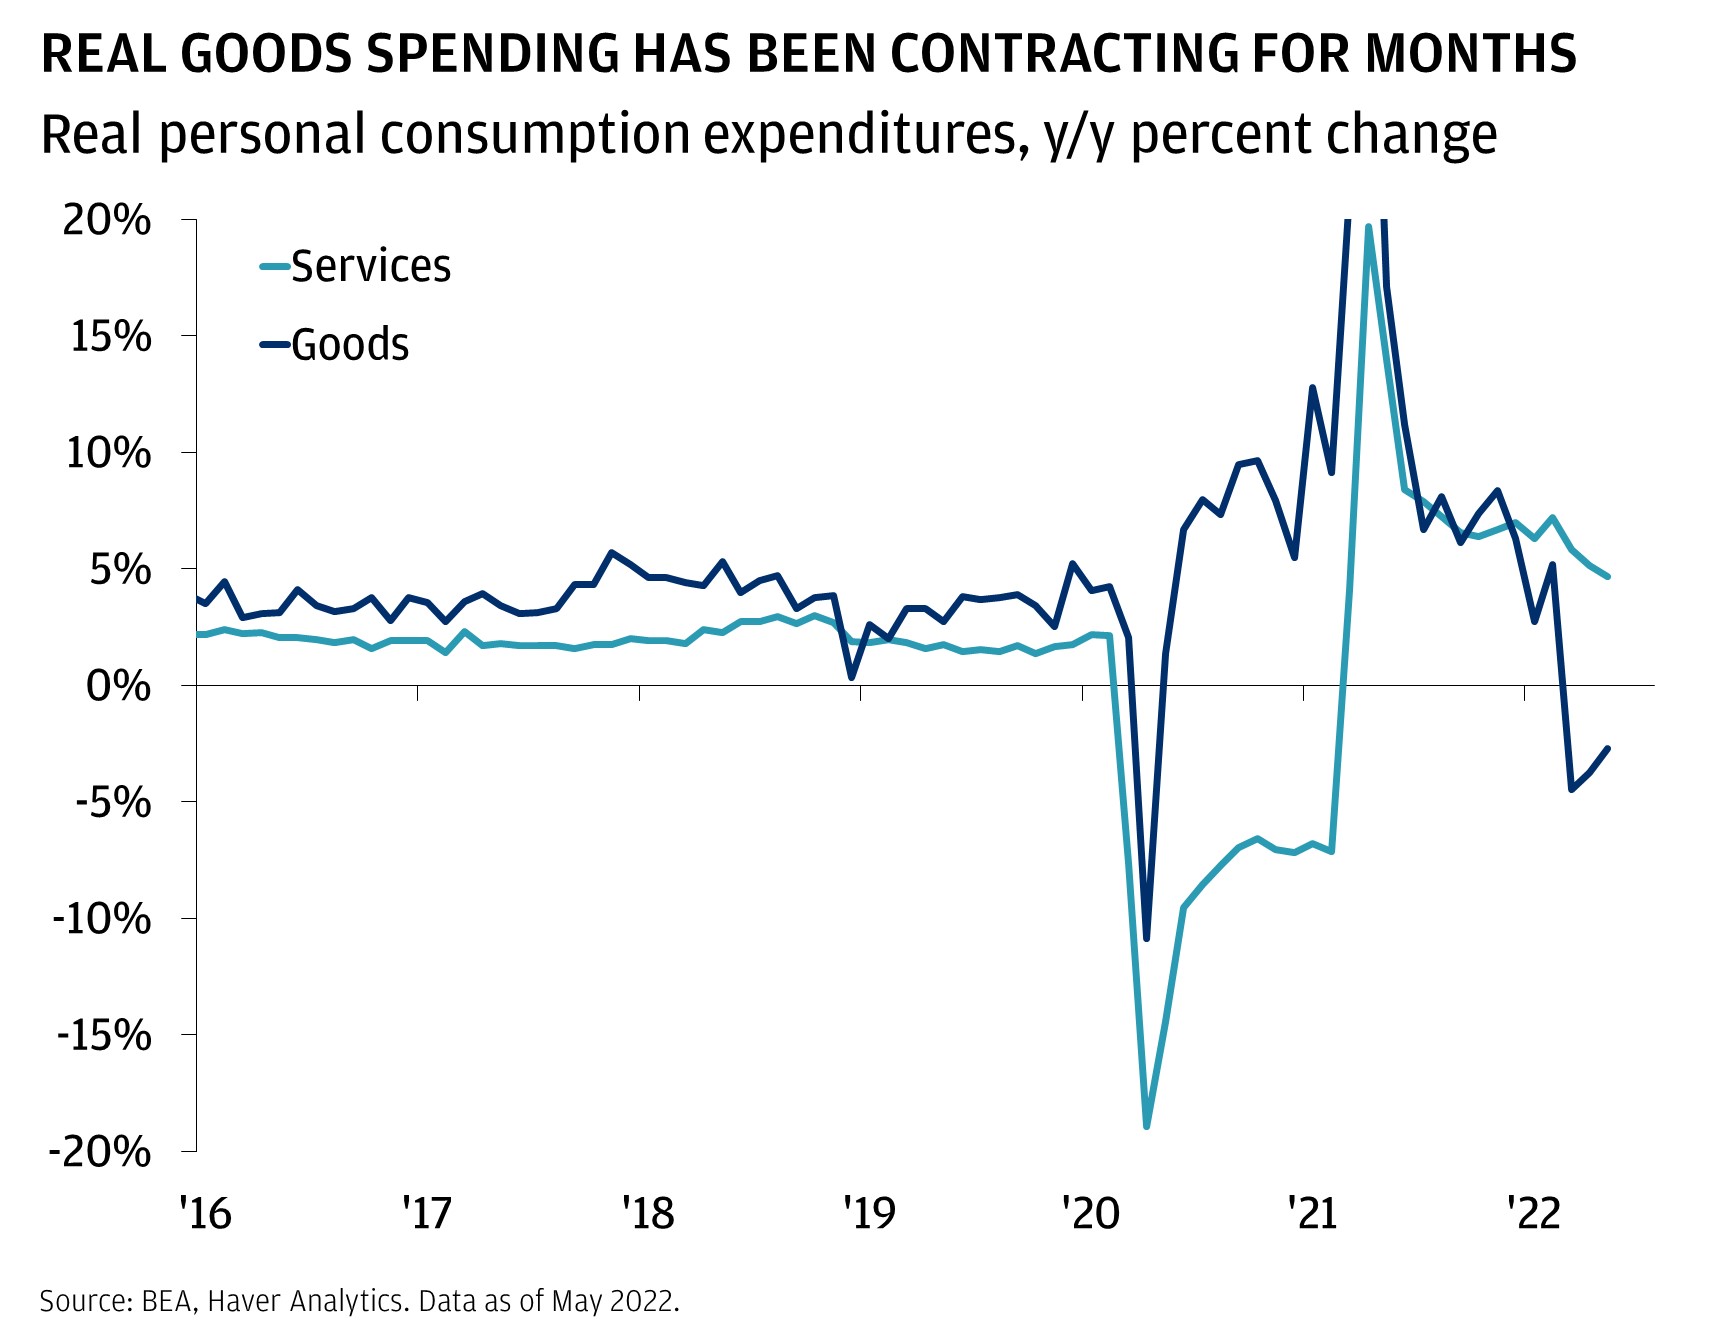 This chart shows the real personal consumption expenditure (PCE) services and goods segments, in year-over-year percentage change terms from 2016 to 2022.